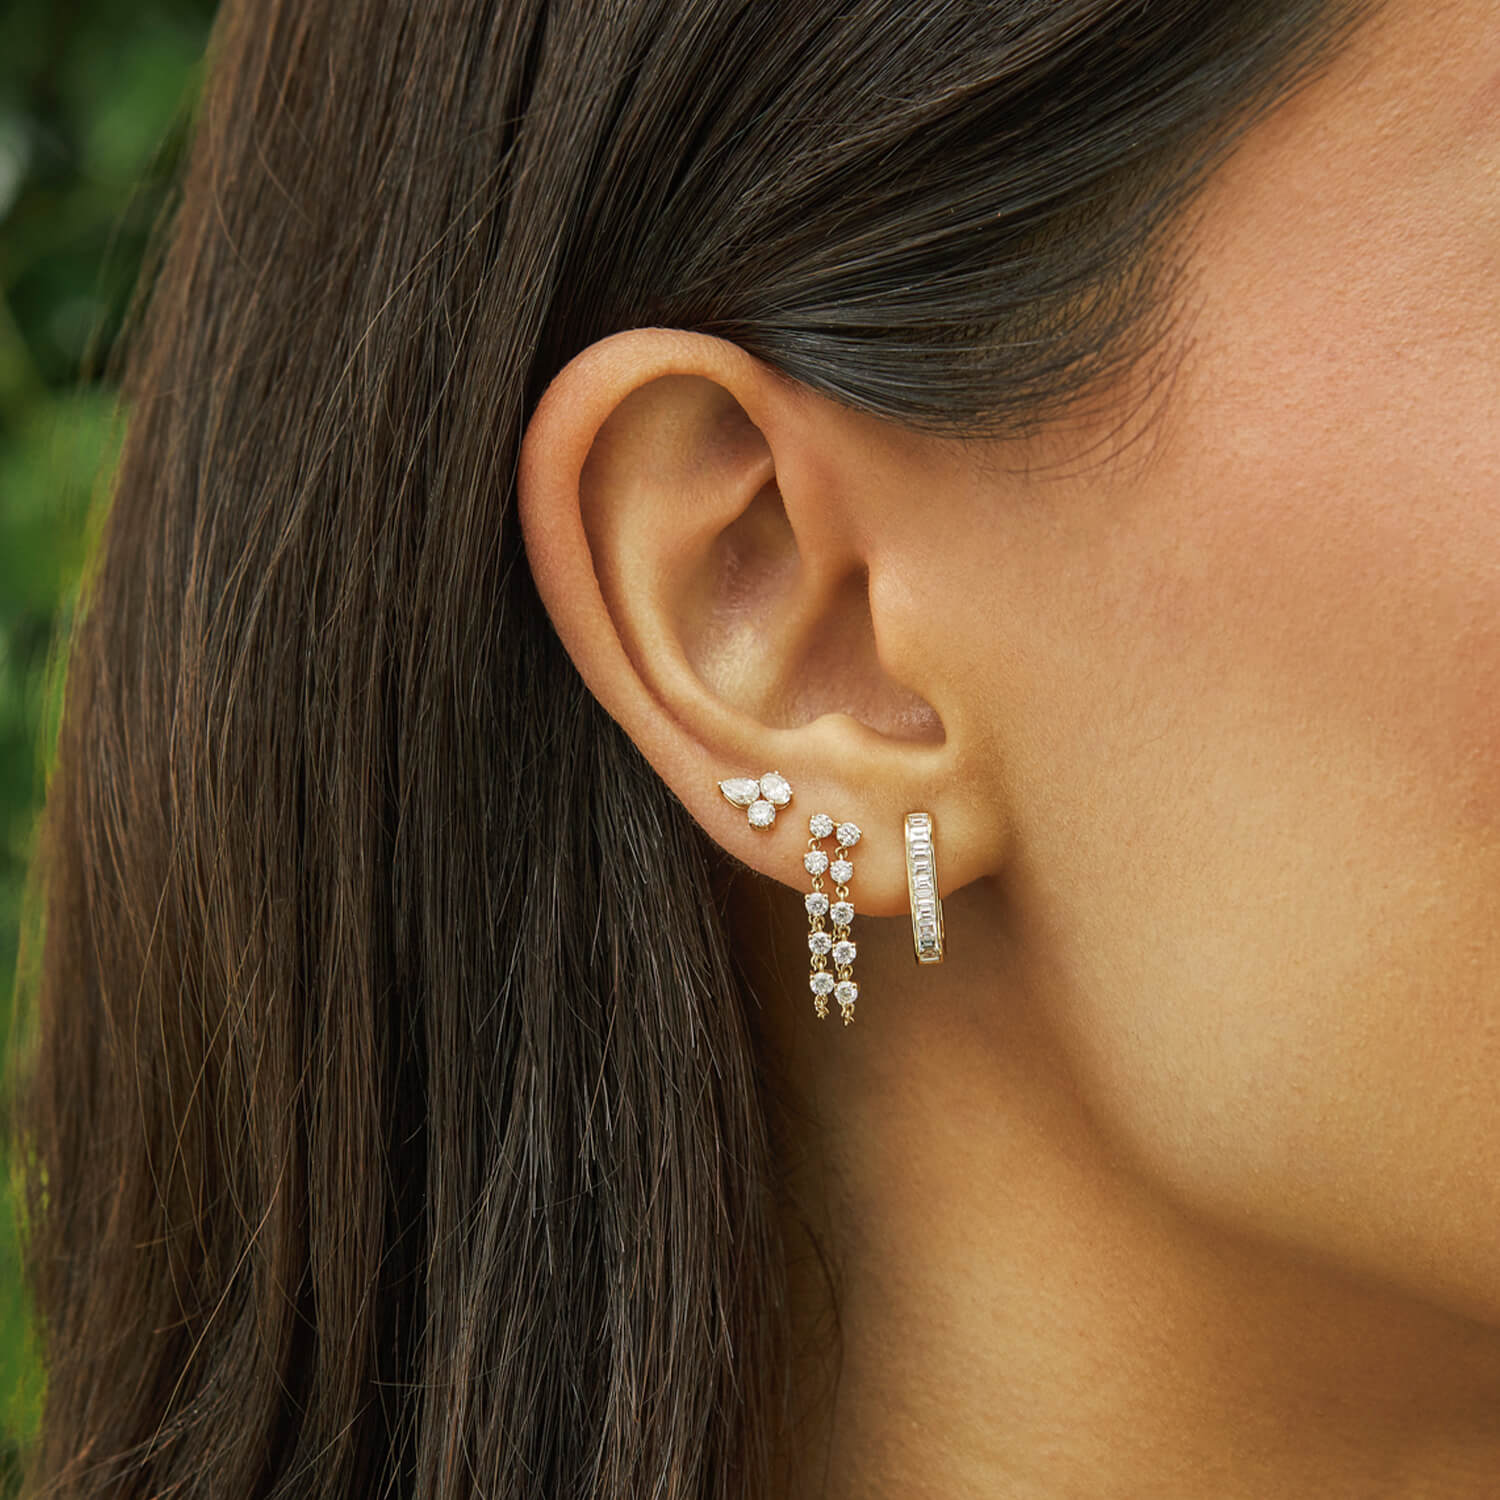 EF Collection 14k yellow gold earrings with diamonds styled on ear of model